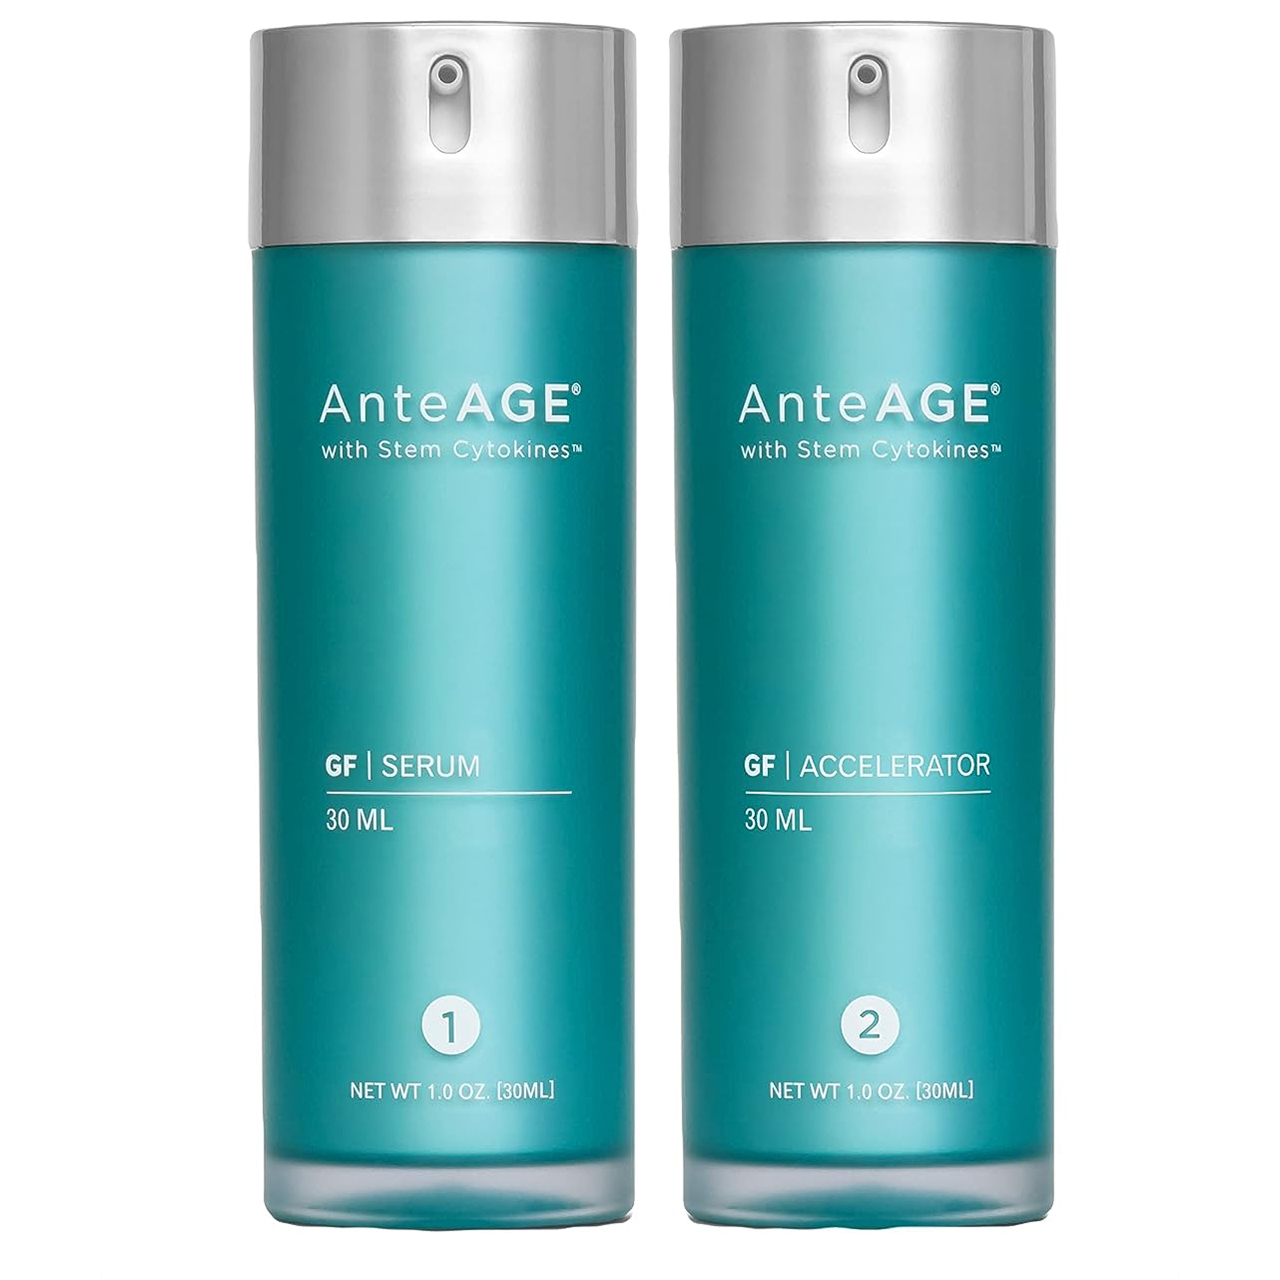 AnteAGE Pro System Questions & Answers